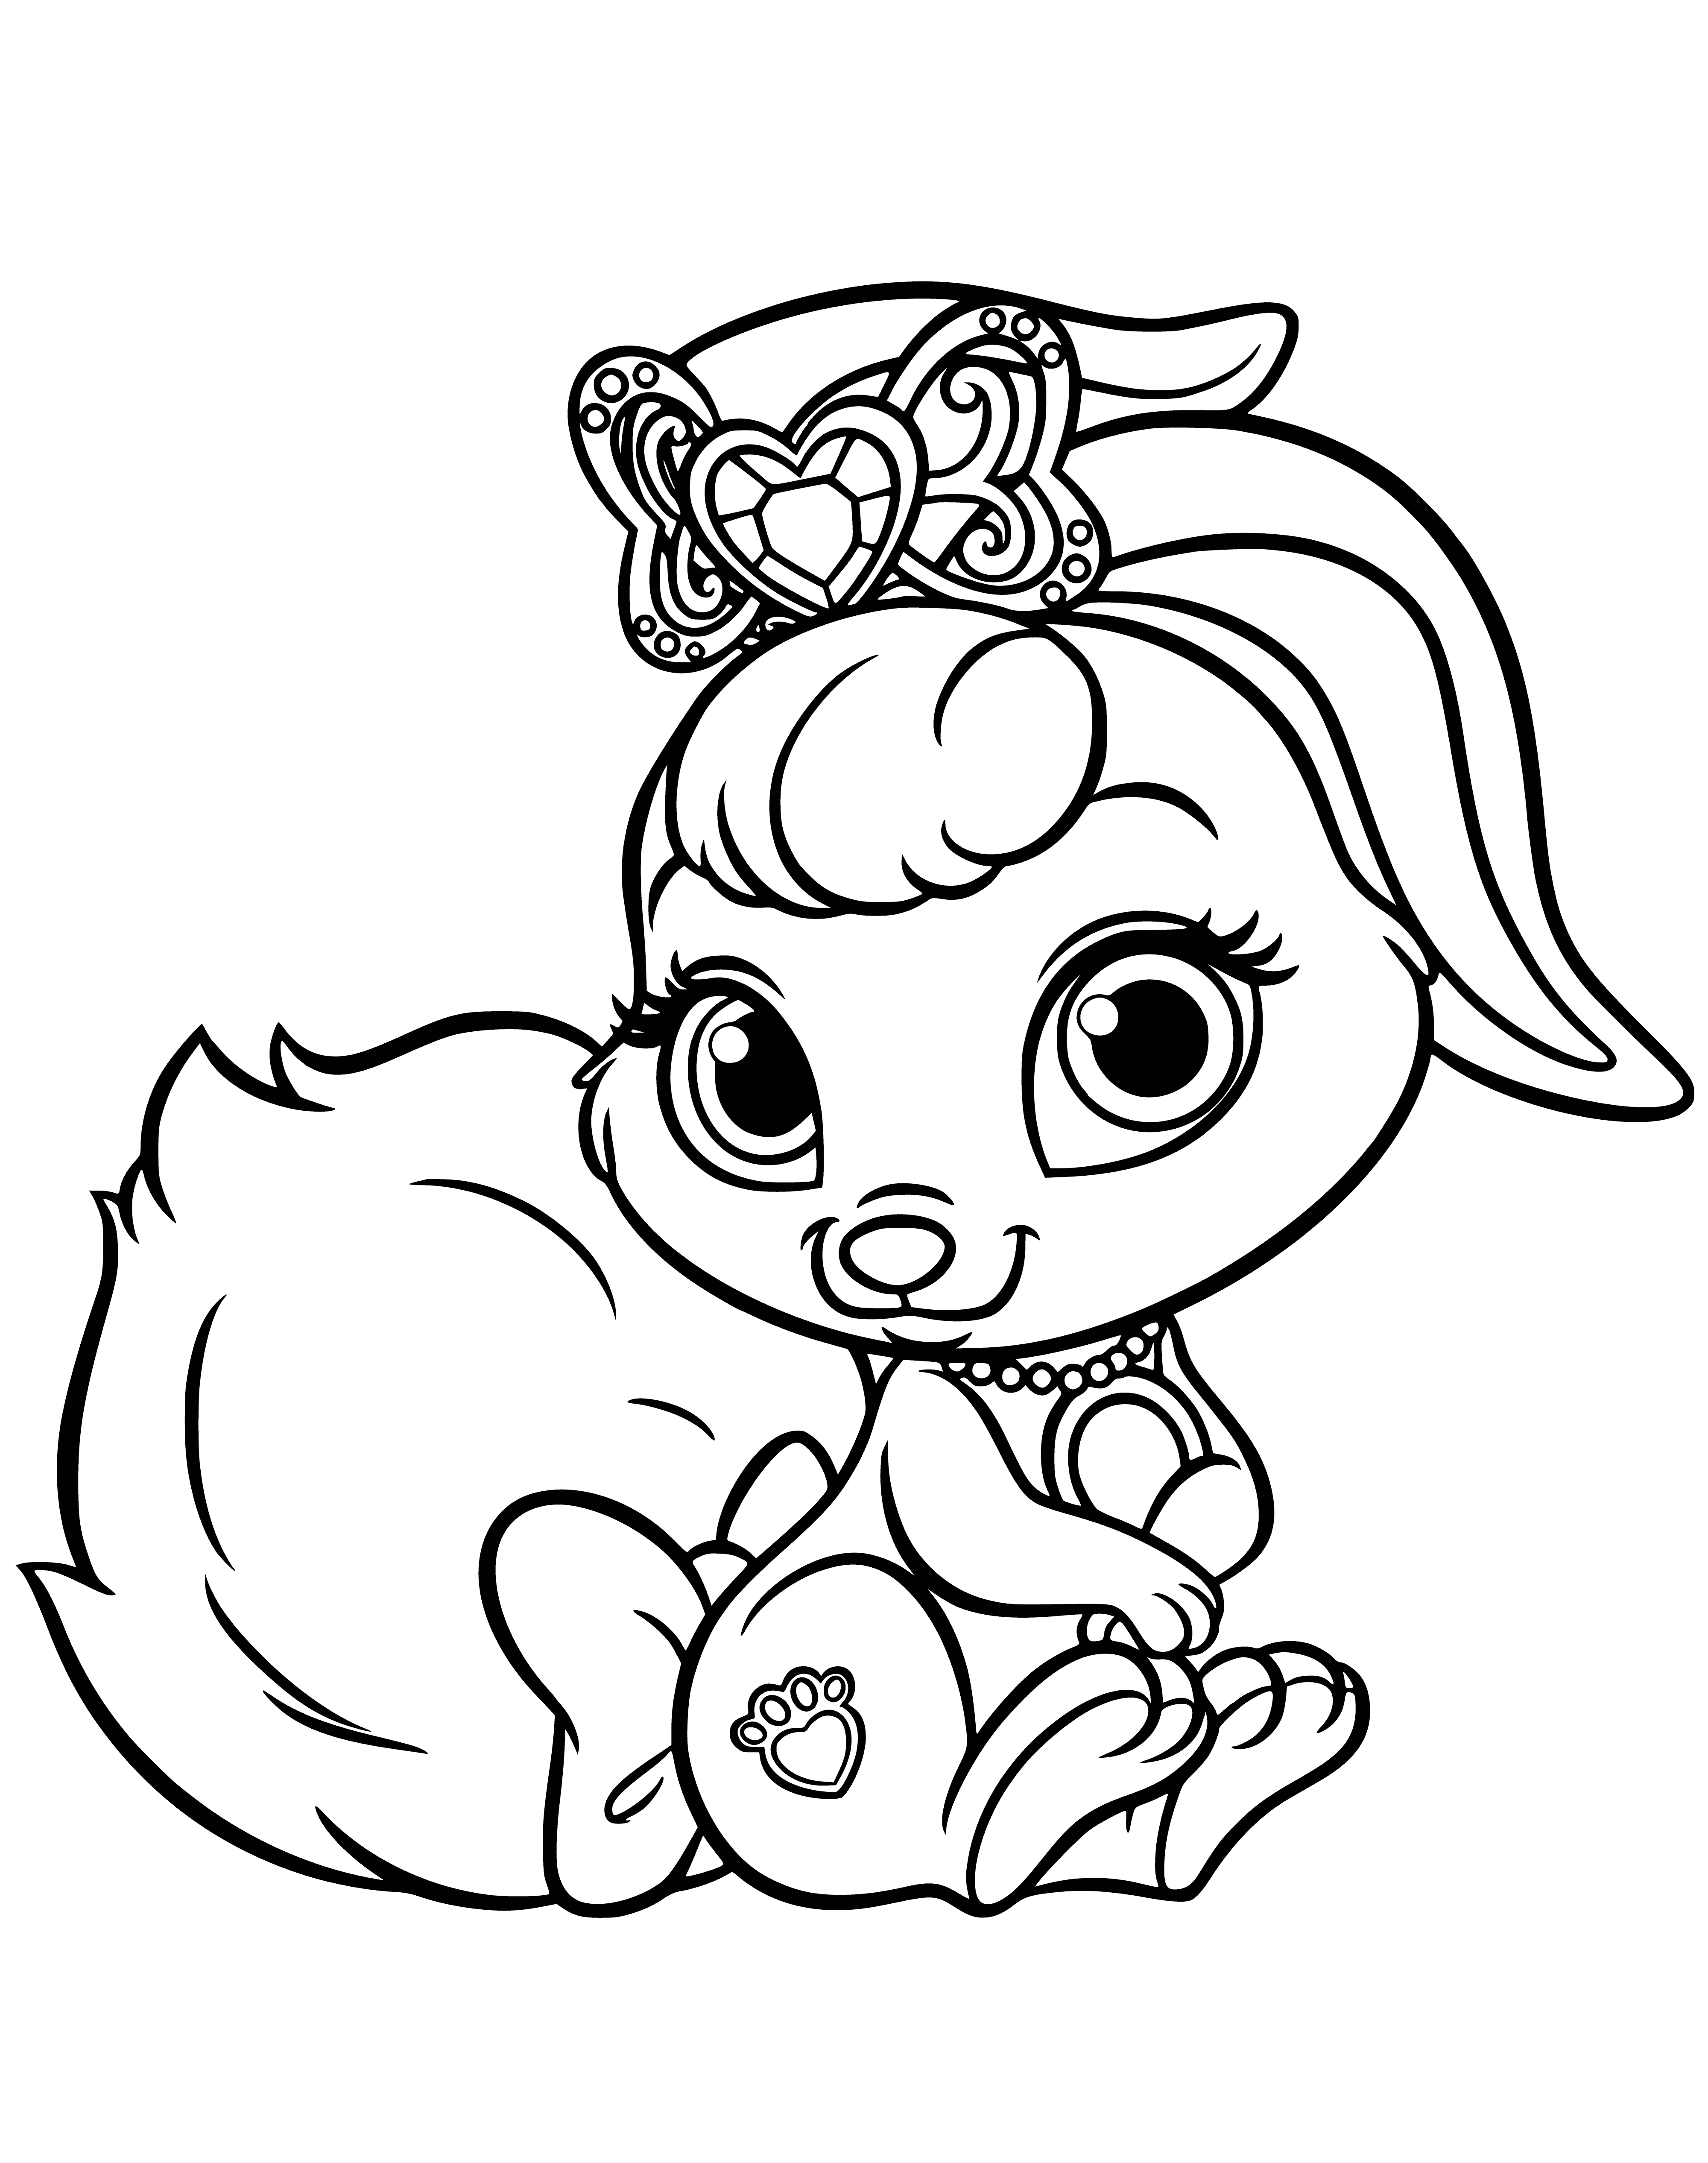 coloring page: Snowberry, Snow White's timid pet hare, lounges with drooping ears. Sweet personality despite shyness.